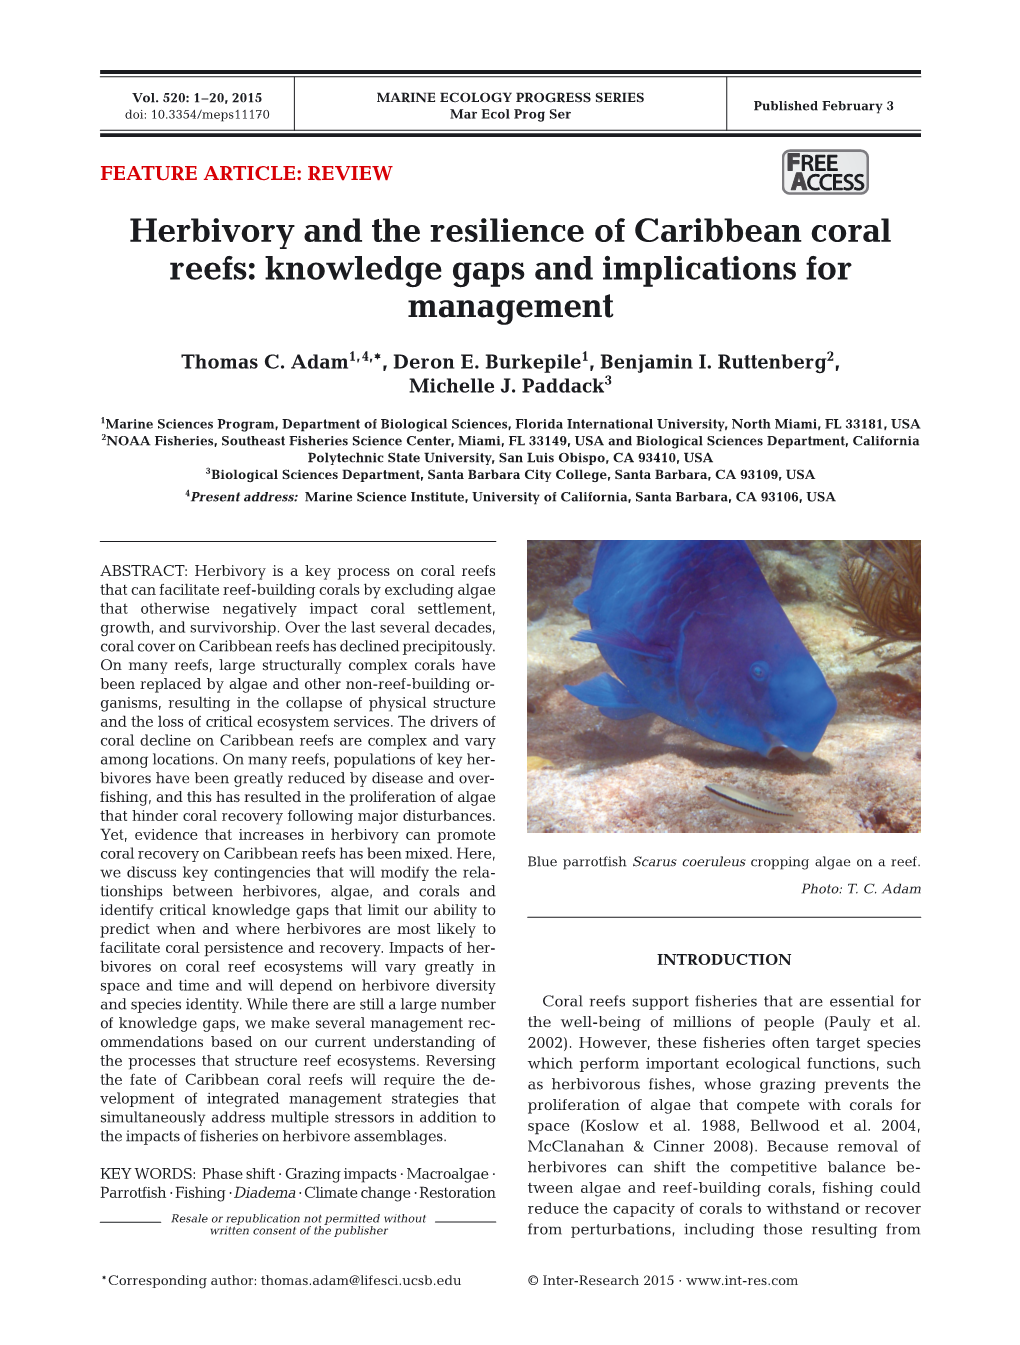 Herbivory and the Resilience of Caribbean Coral Reefs: Knowledge Gaps and Implications for Management